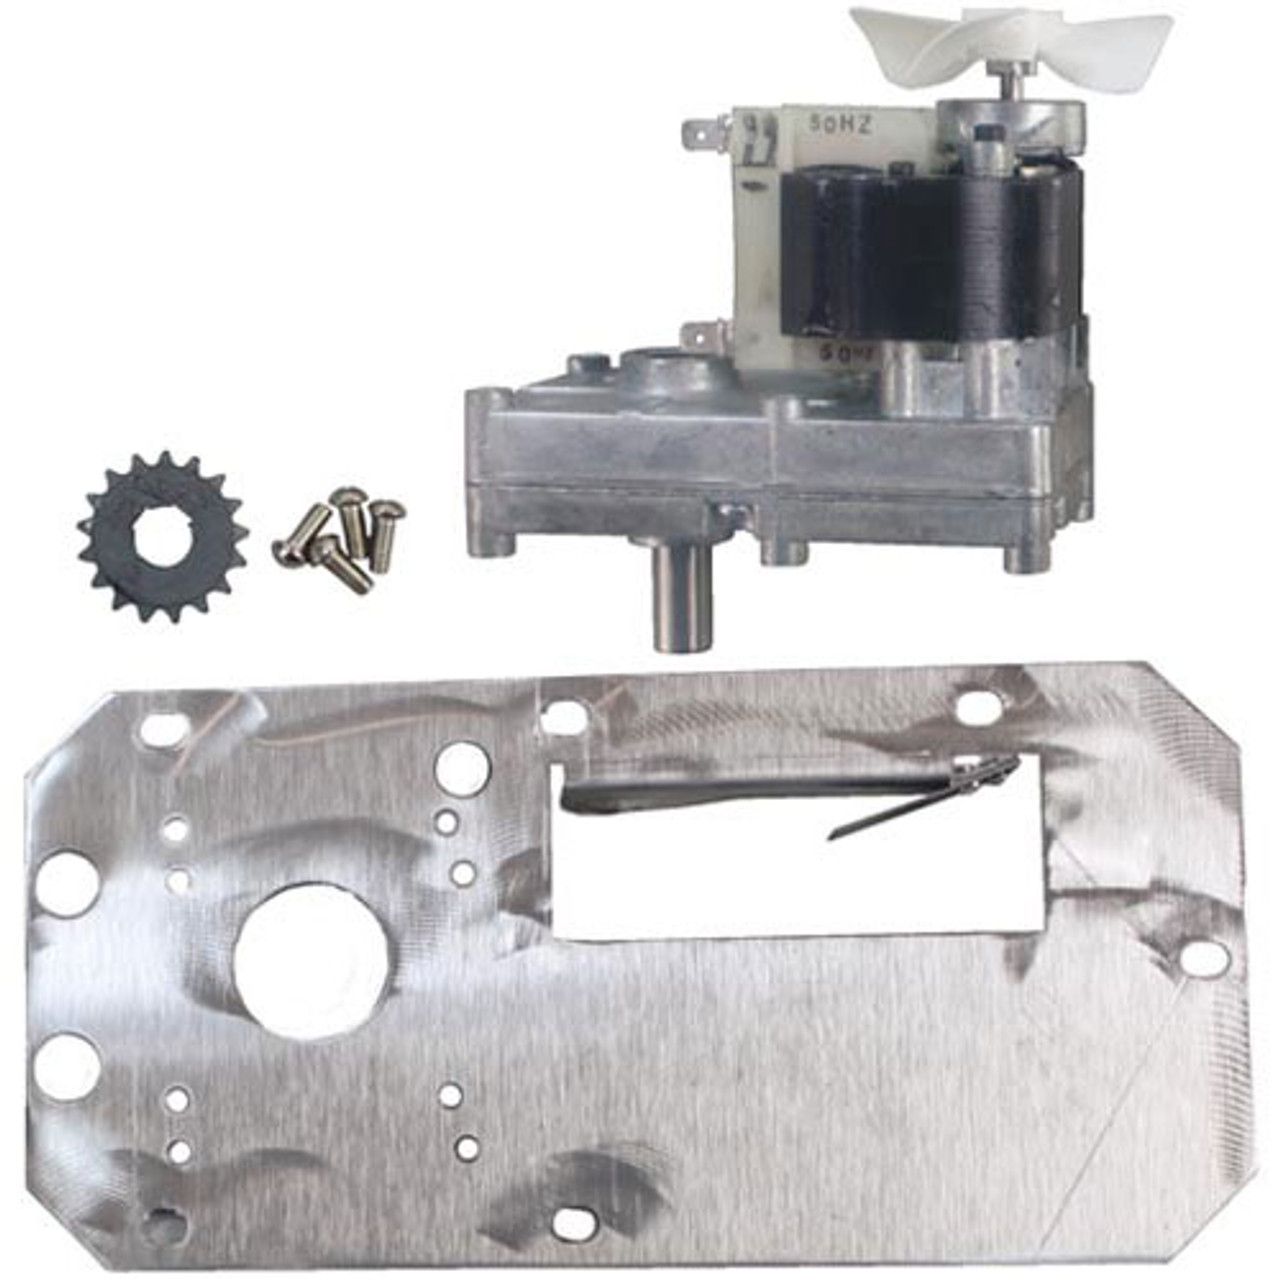 Motor Kit - 240V - Replacement Part For Star Mfg PS-RG2026